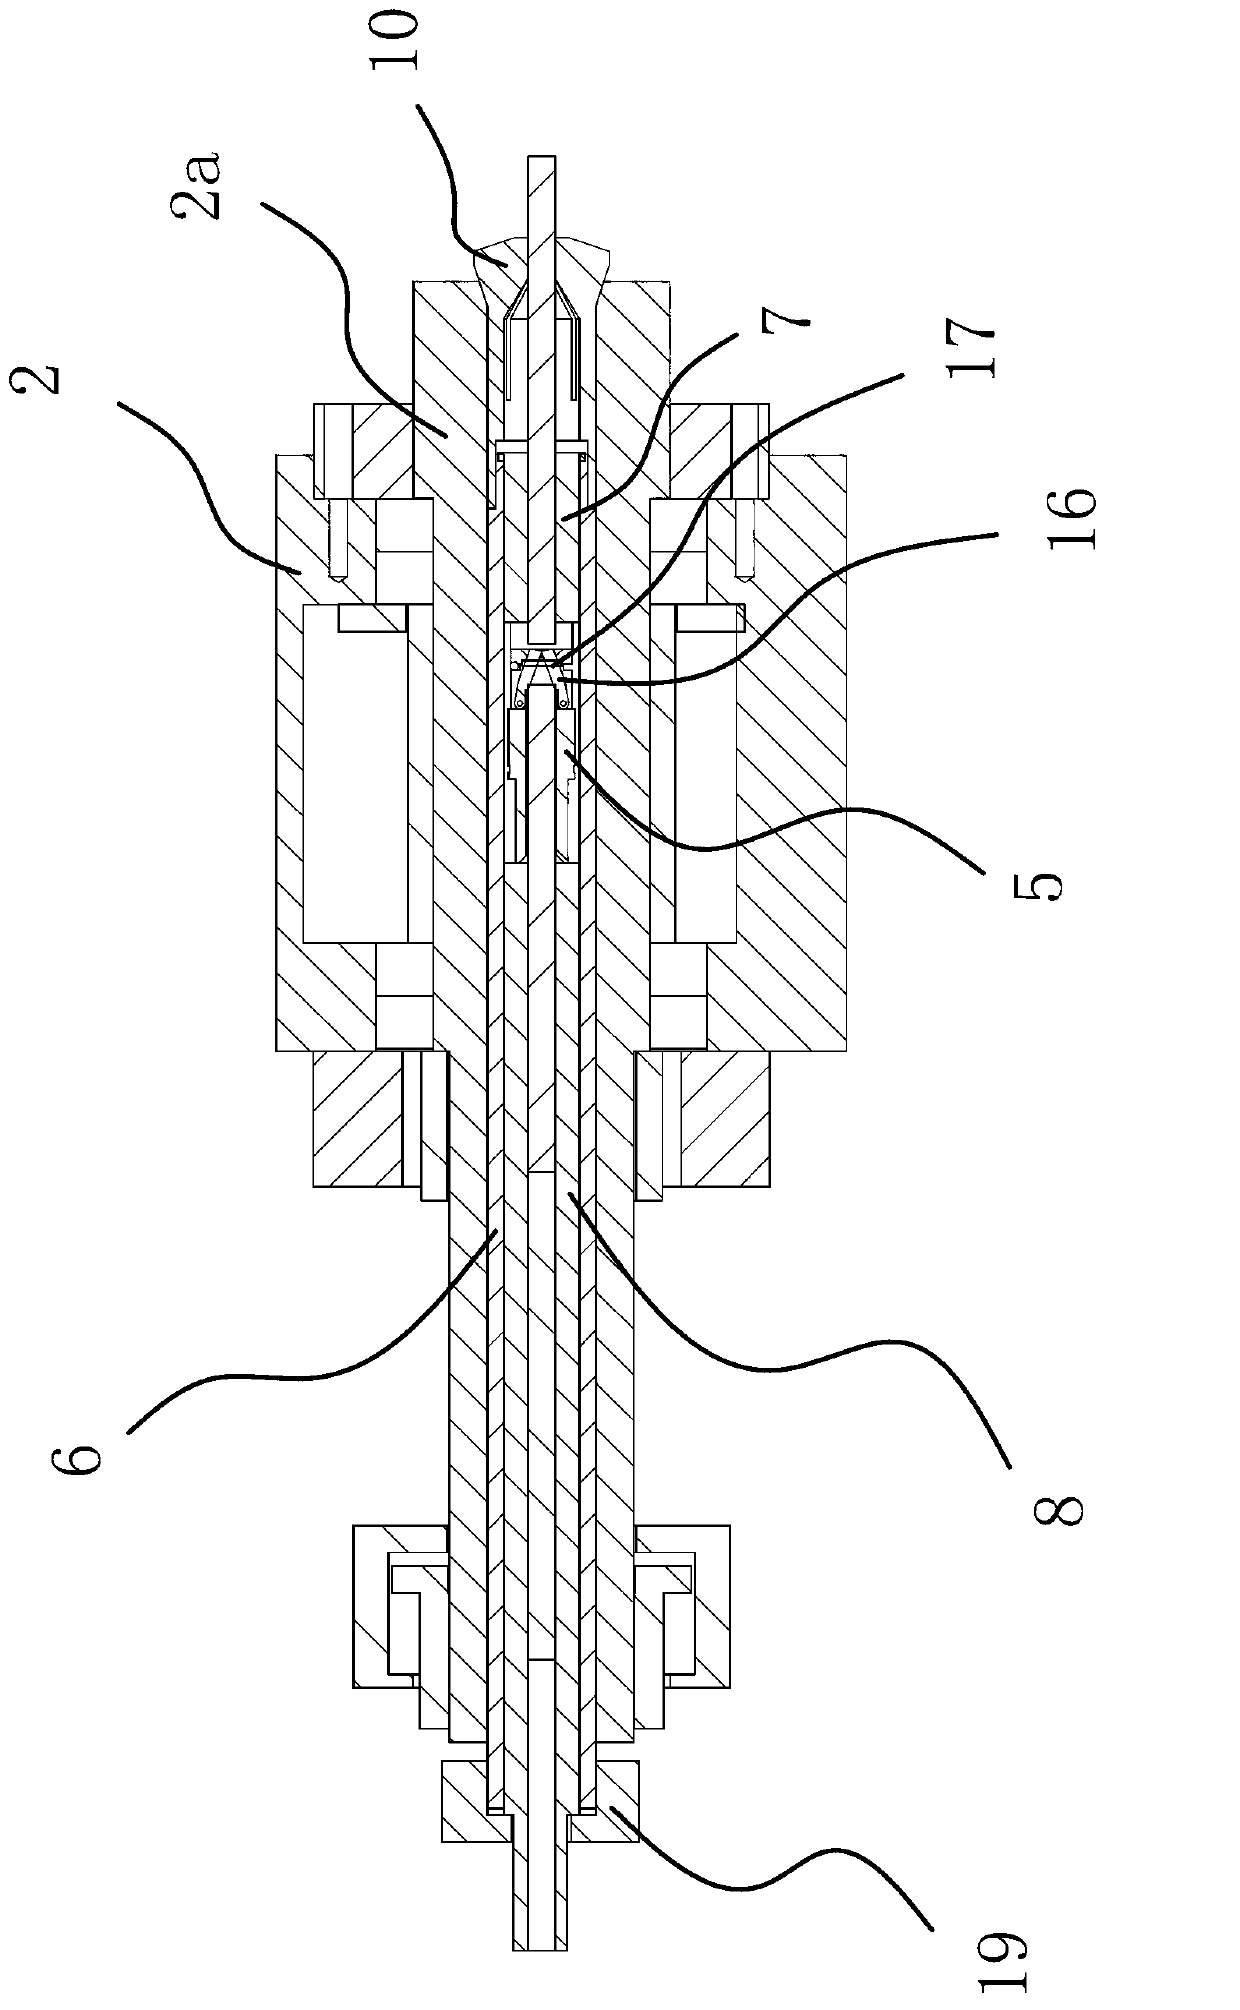 Full-automatic numerically-controlled machine tool for shafts